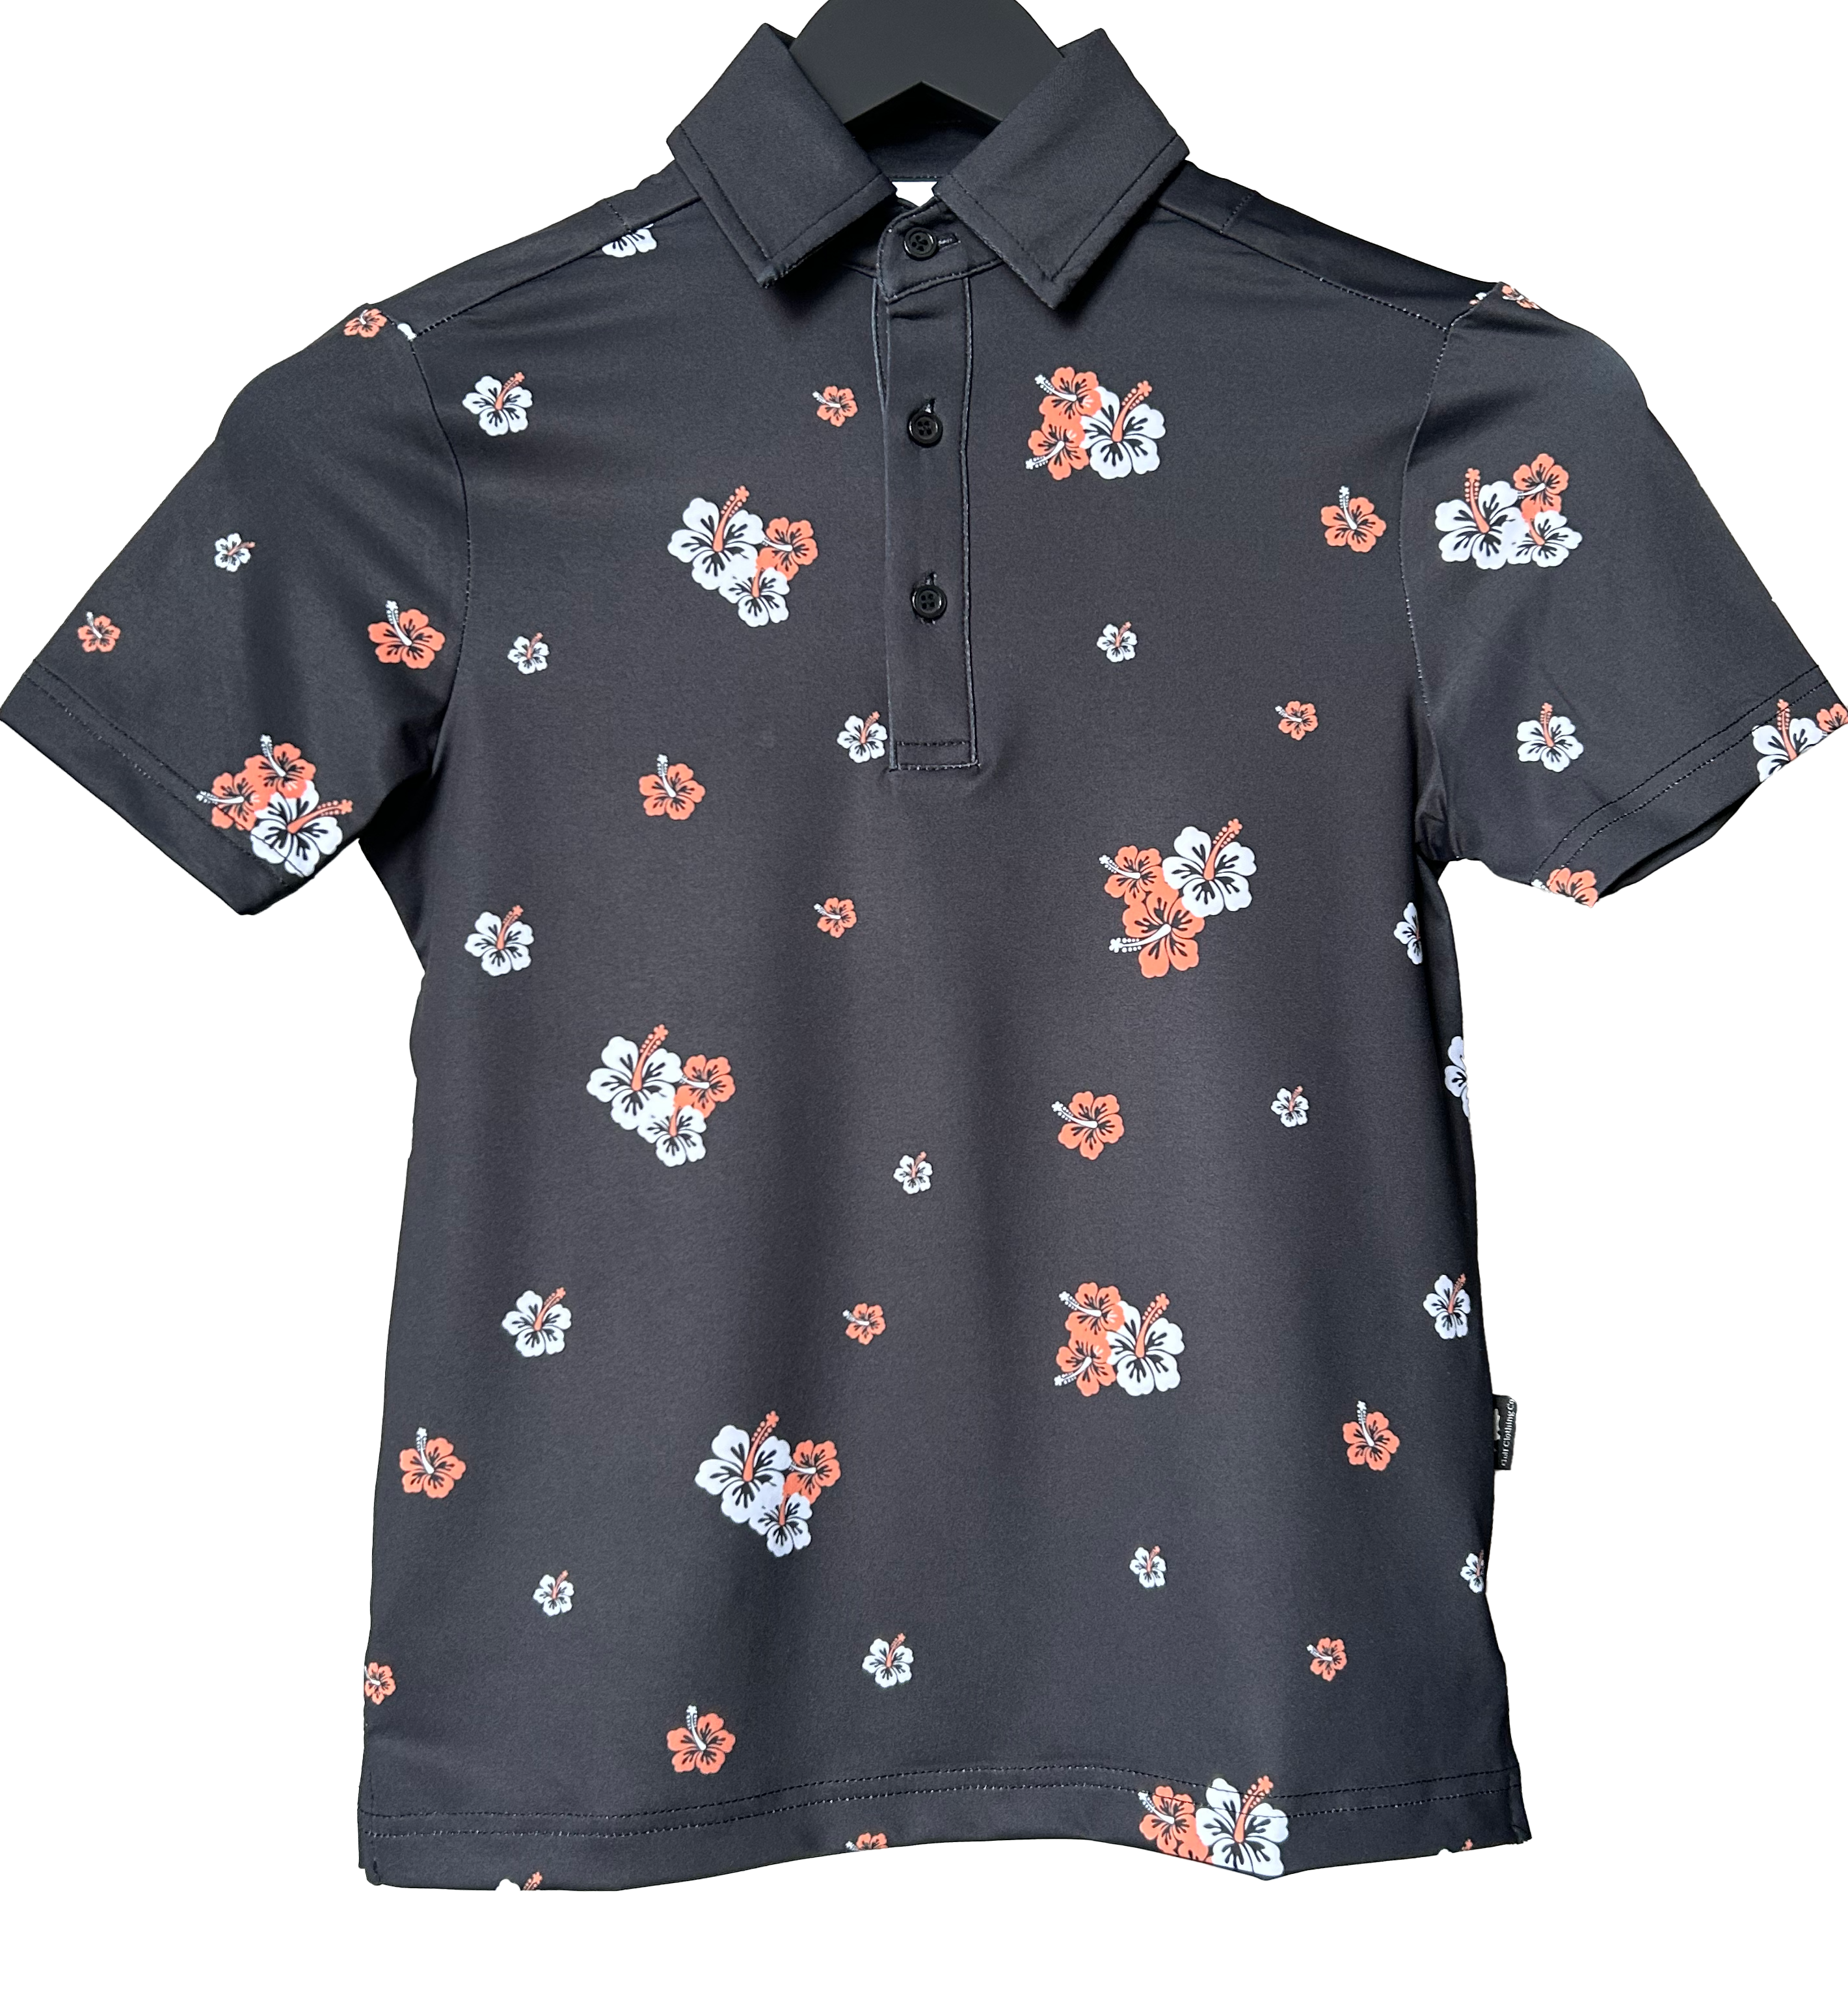 Flower Power Youth/Teen Polo